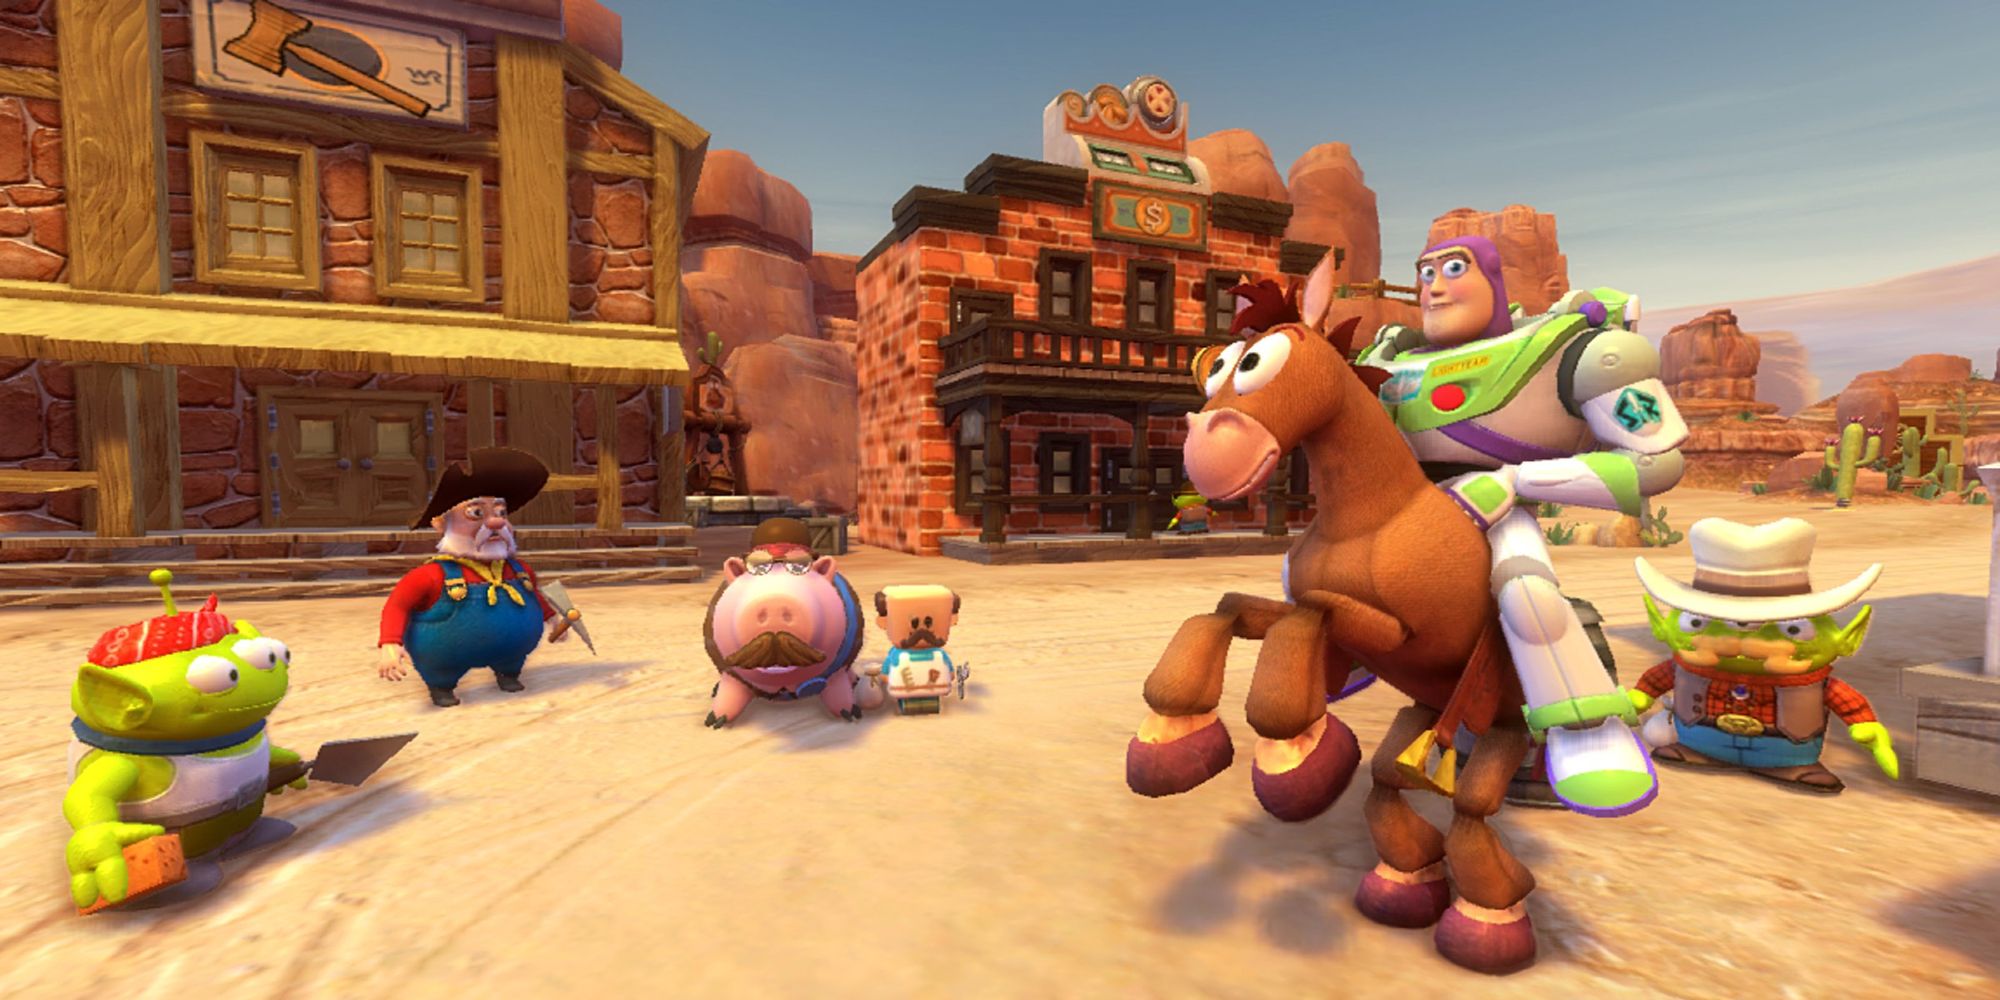 The cast of characters from the Toy Story 3 video game.